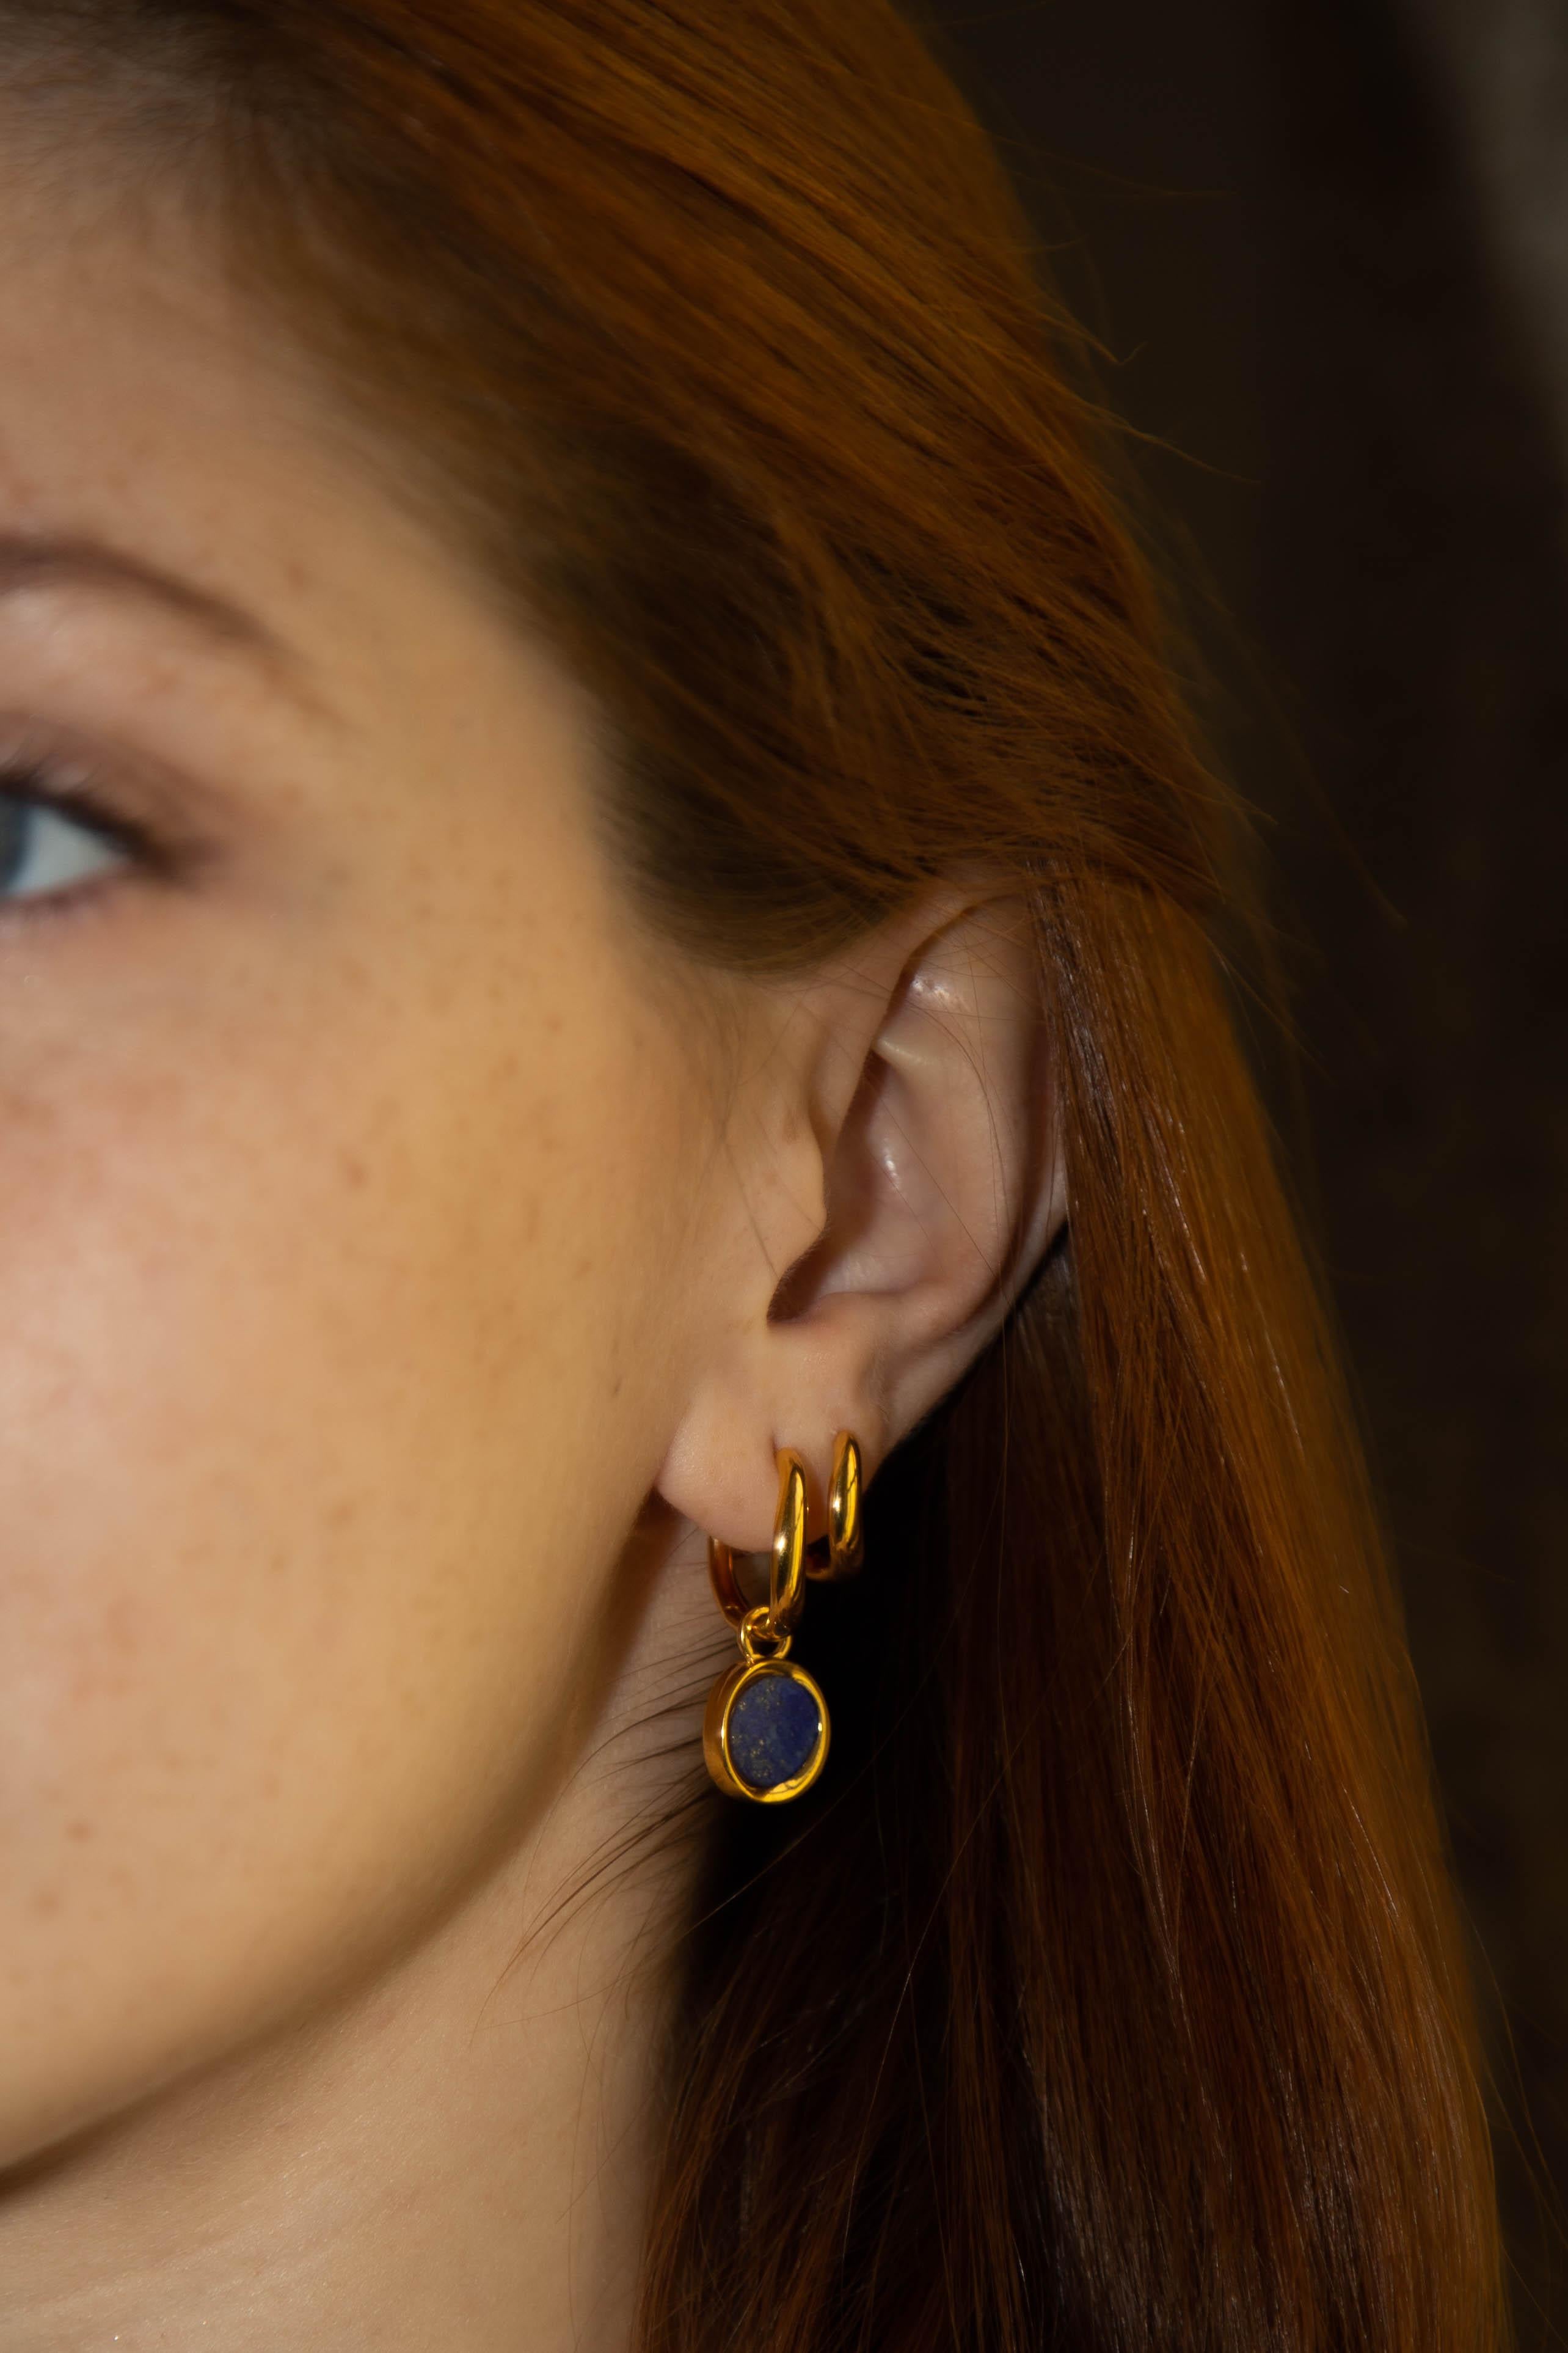 Portrait Cut Boomerang Hoops 18k Solid Gold with Lapis Lazuli on Both Hoops For Sale